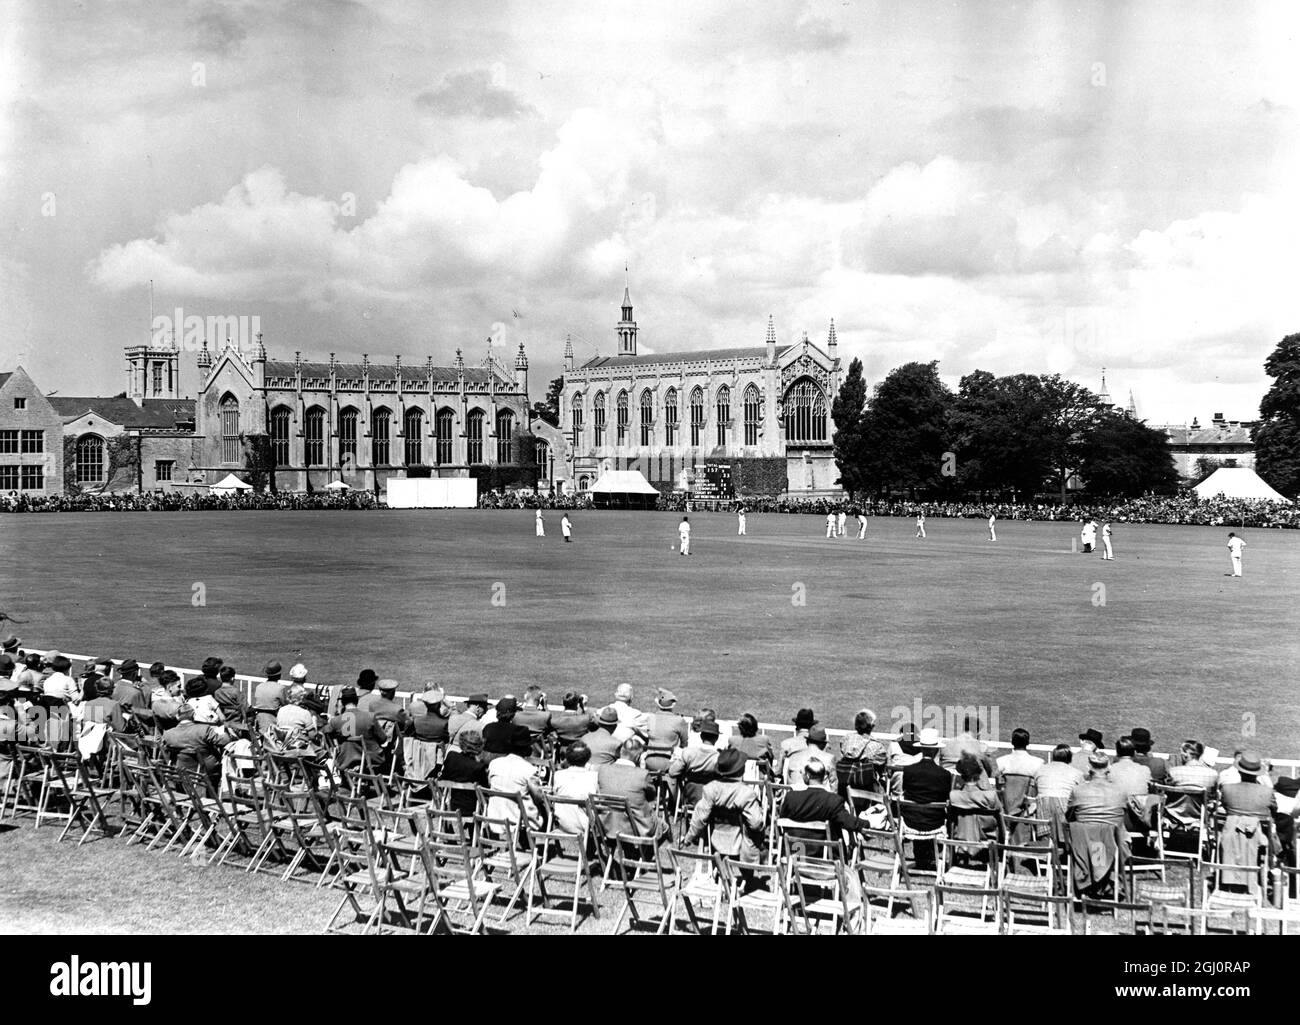 Gloucestershire V Kent Cheltenham Cricket Week Gloucestershire batting in their match with Kent which opened Cheltenham Cricket week, in the stting of Cheltenham college, with College buildings in the background 15th August 1951 Stock Photo